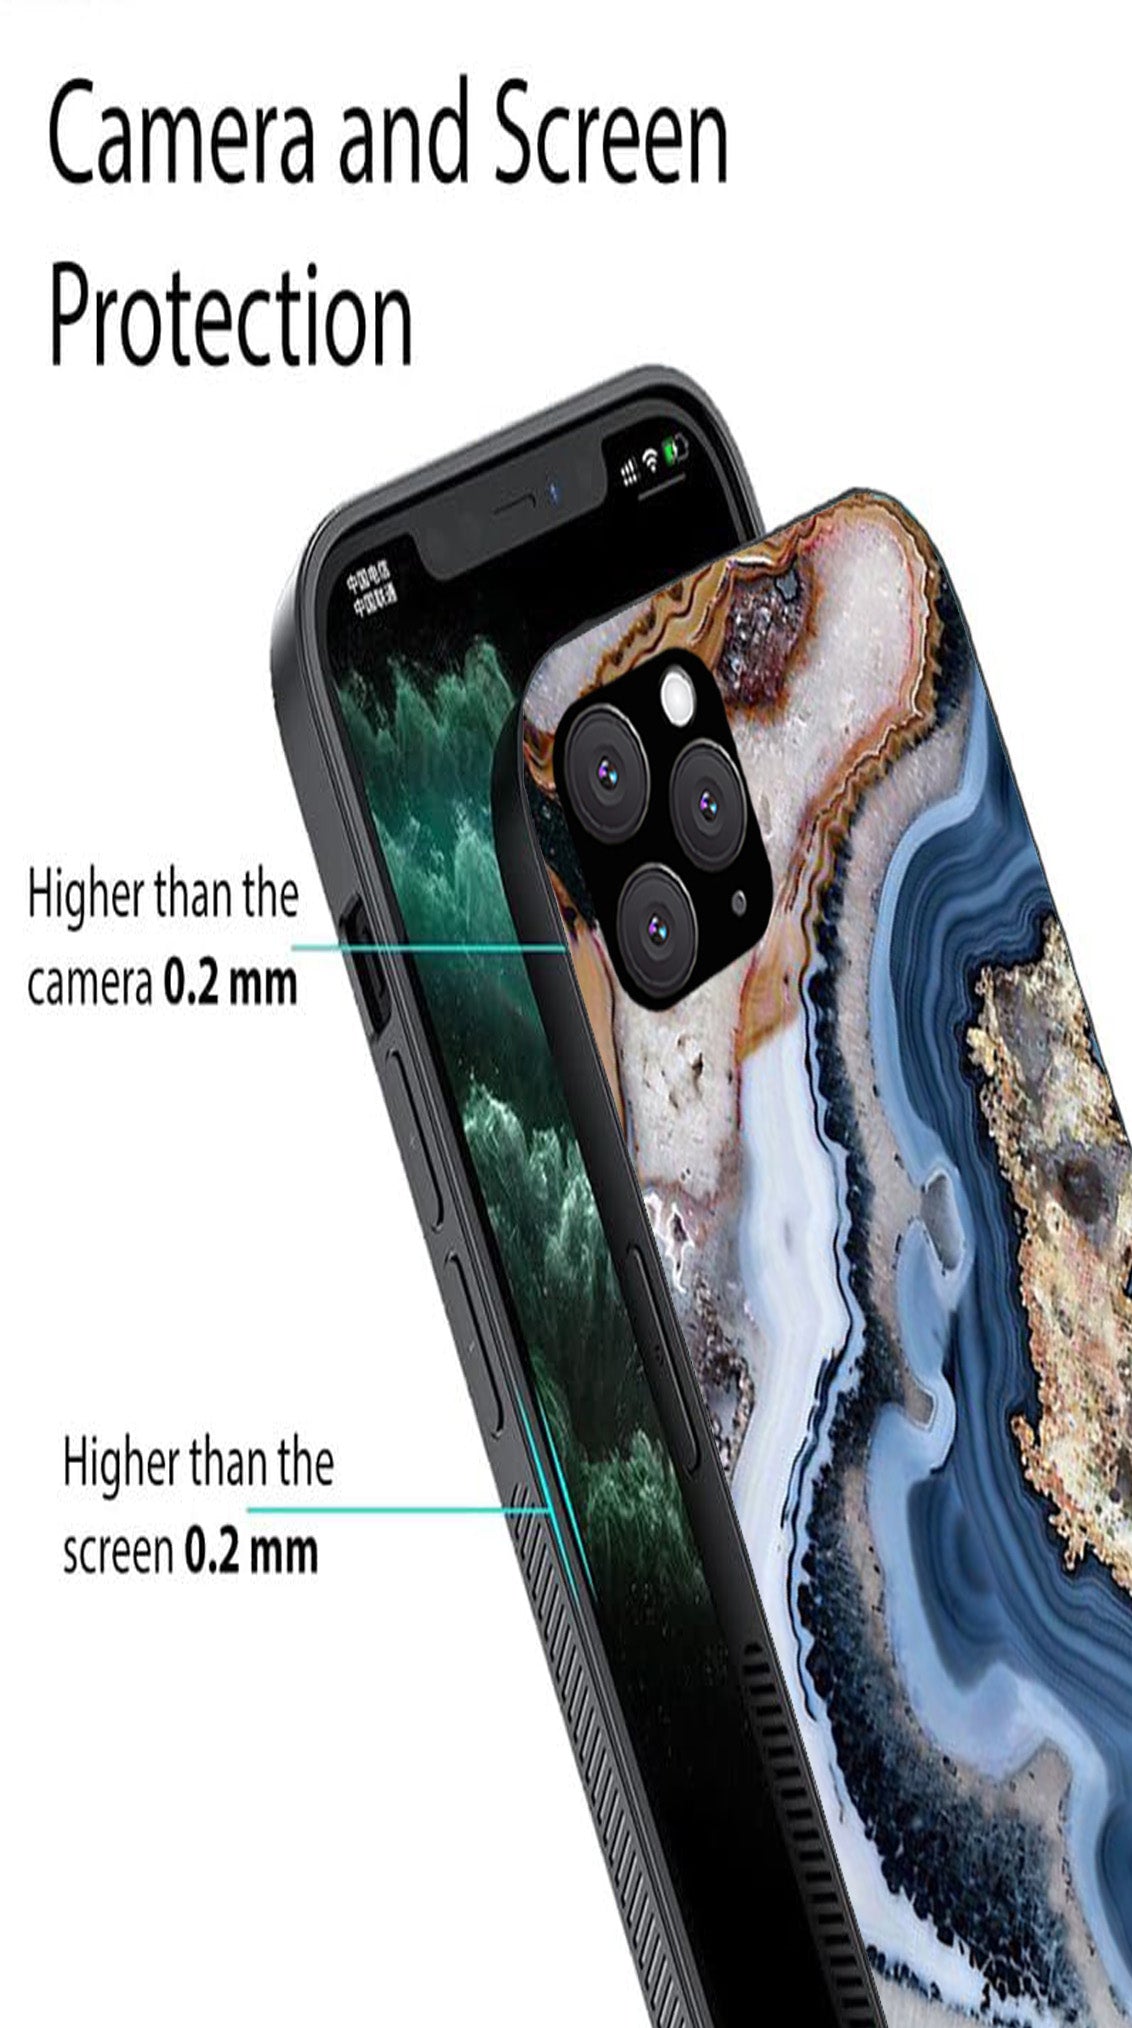 Marble Design Metal Mobile Case for iPhone 11 Pro